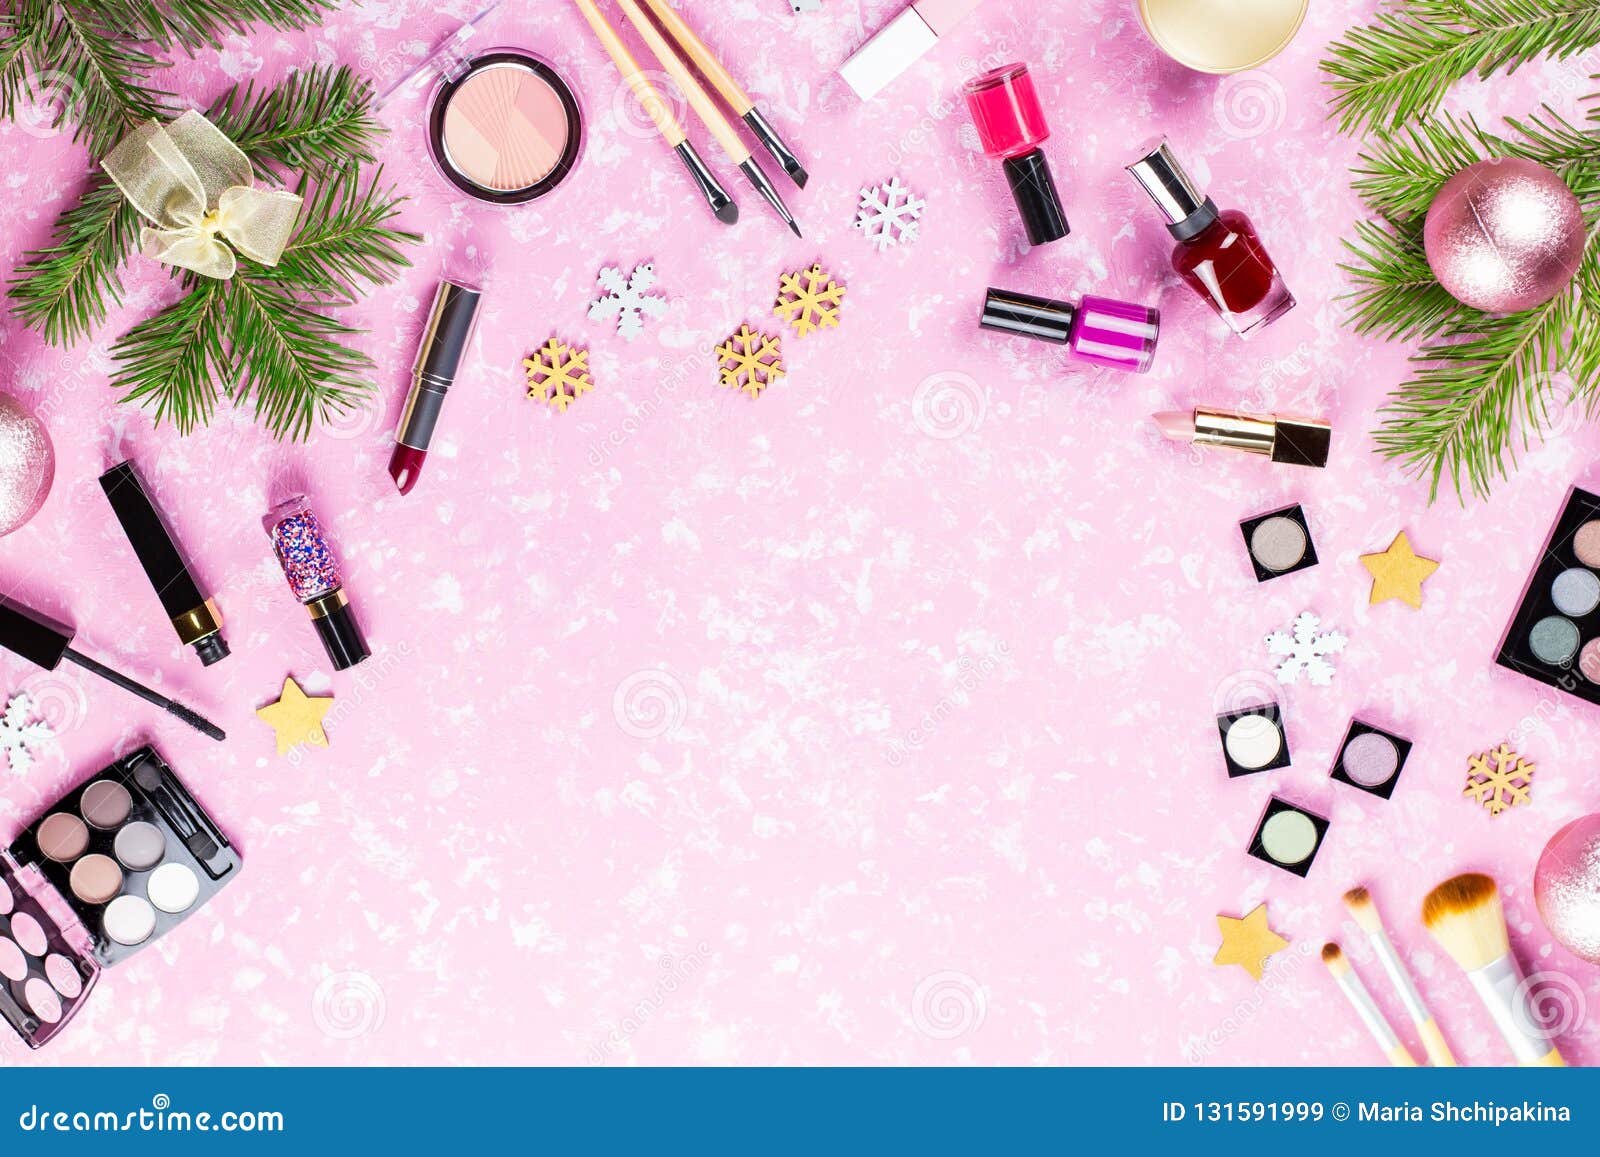 Make Up Cosmetics and Christmas Decorations on Artistic Pink Background ...